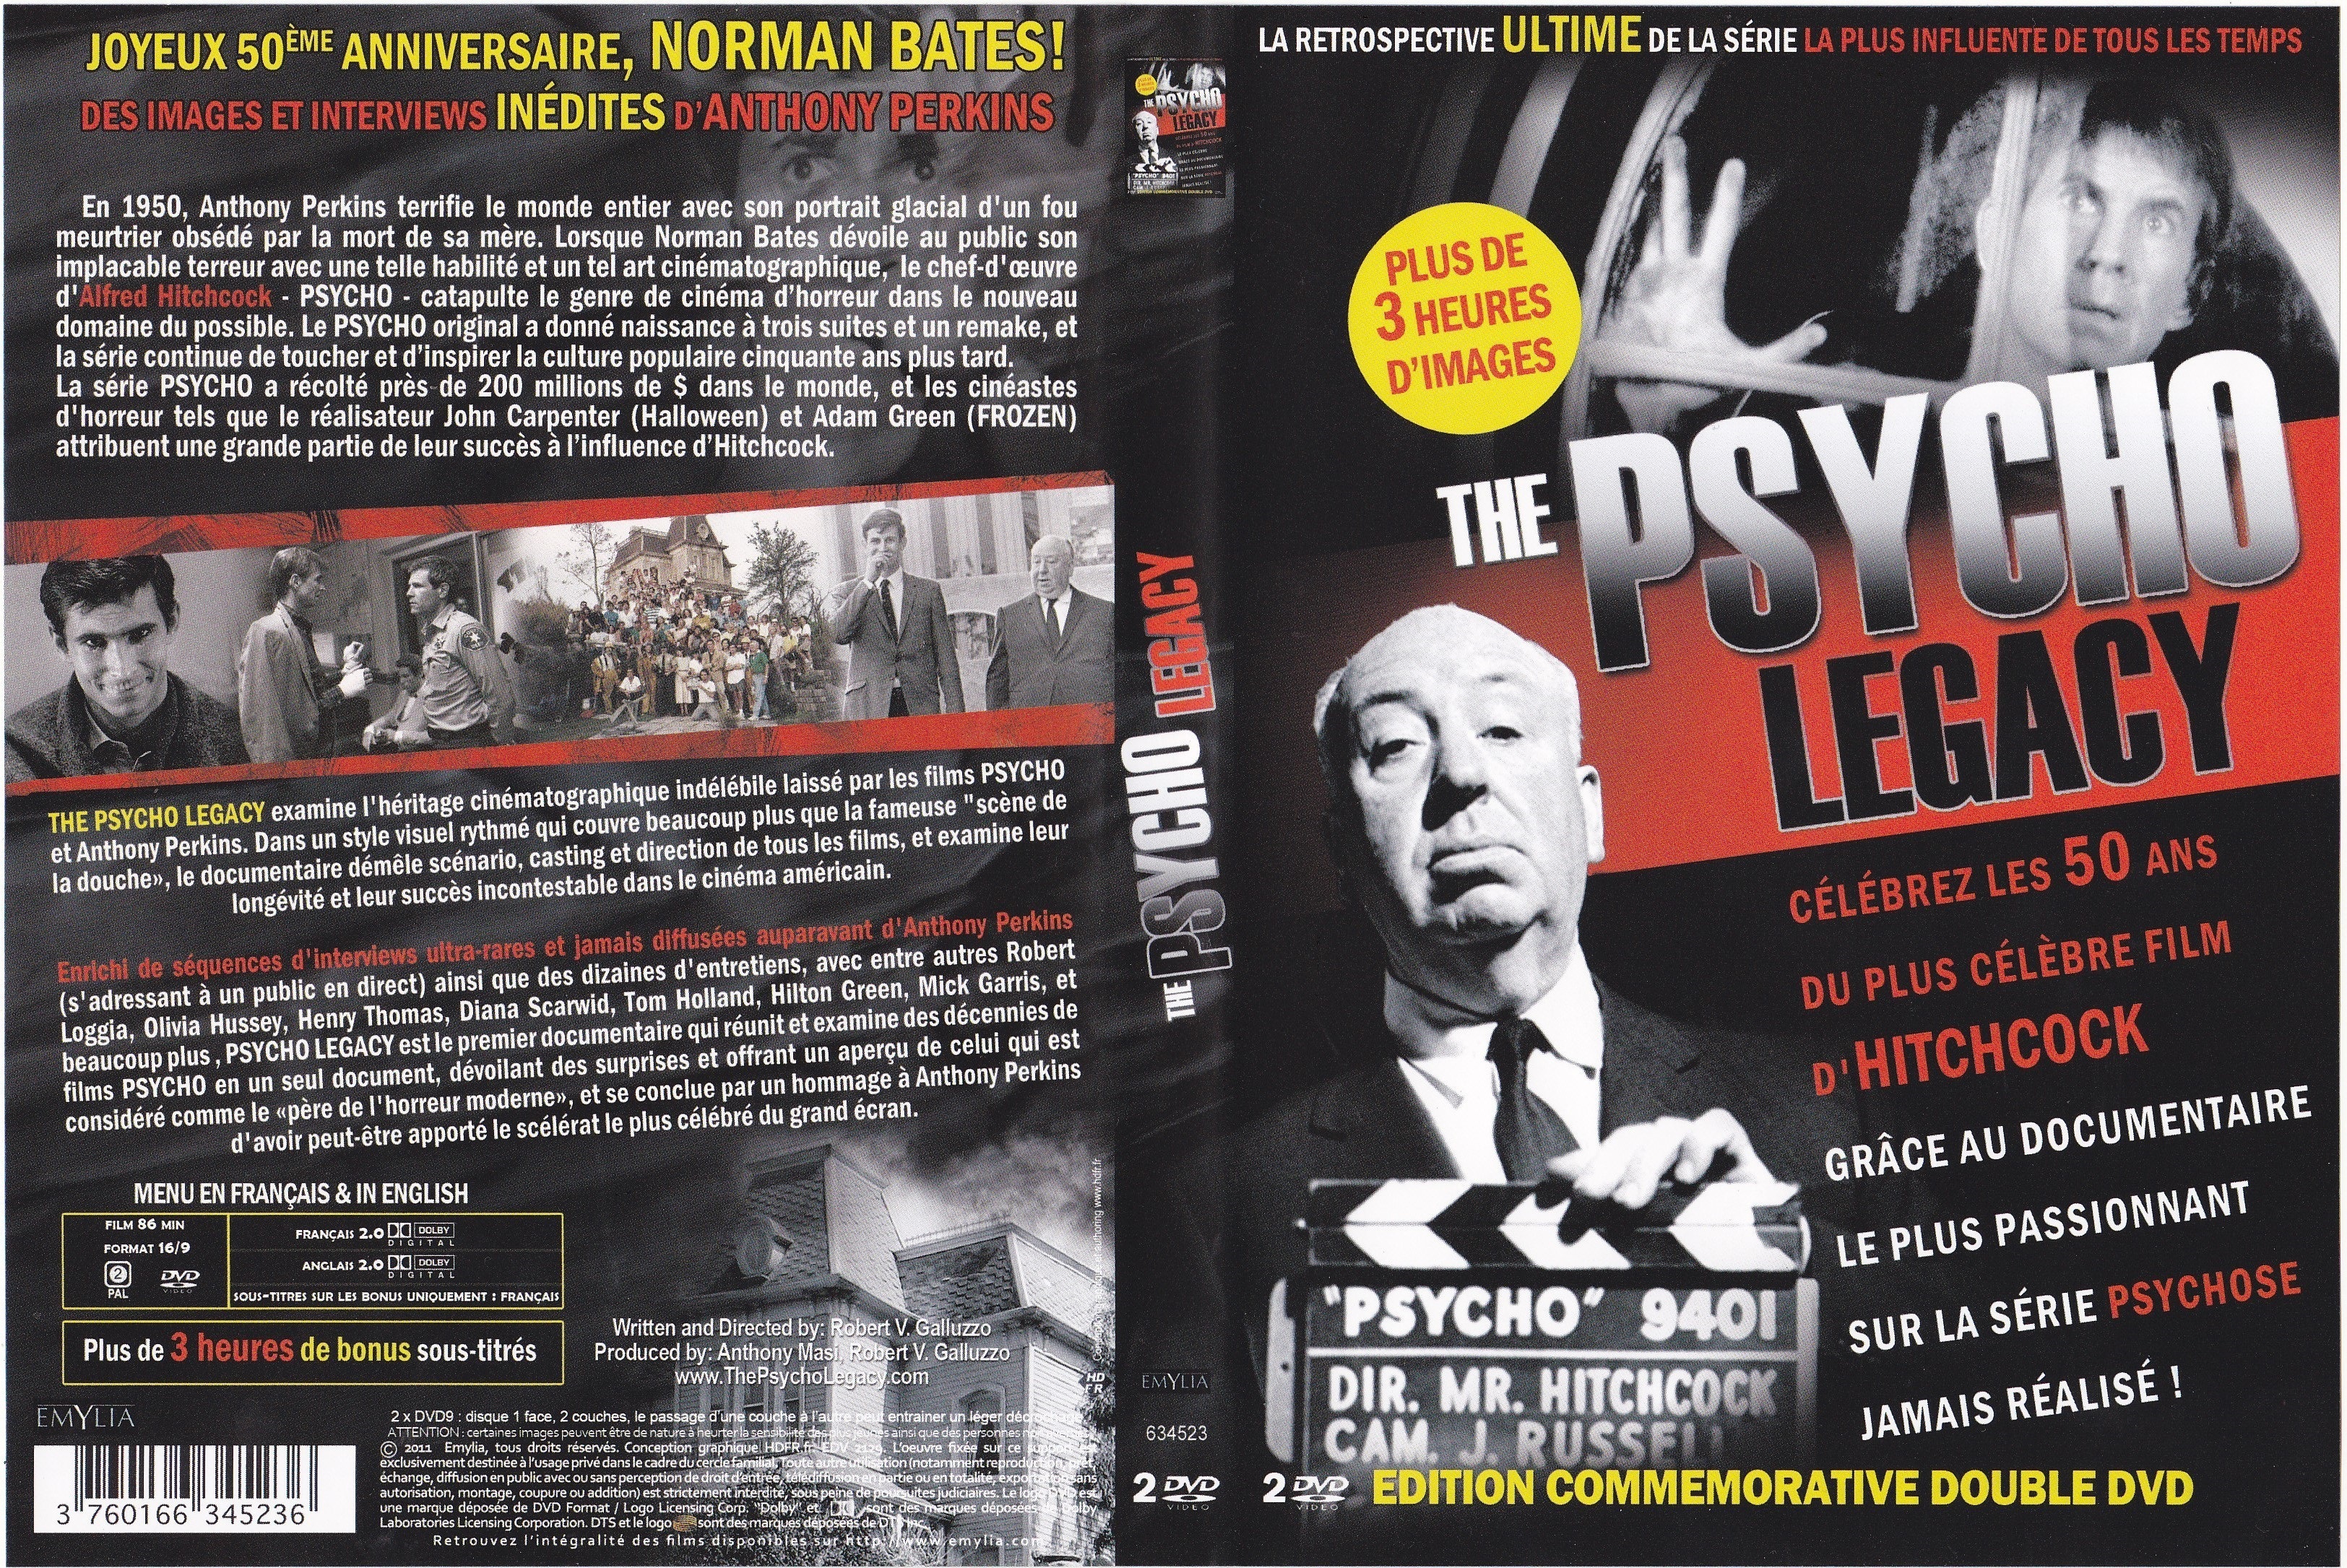 Jaquette DVD The Psycho Legacy